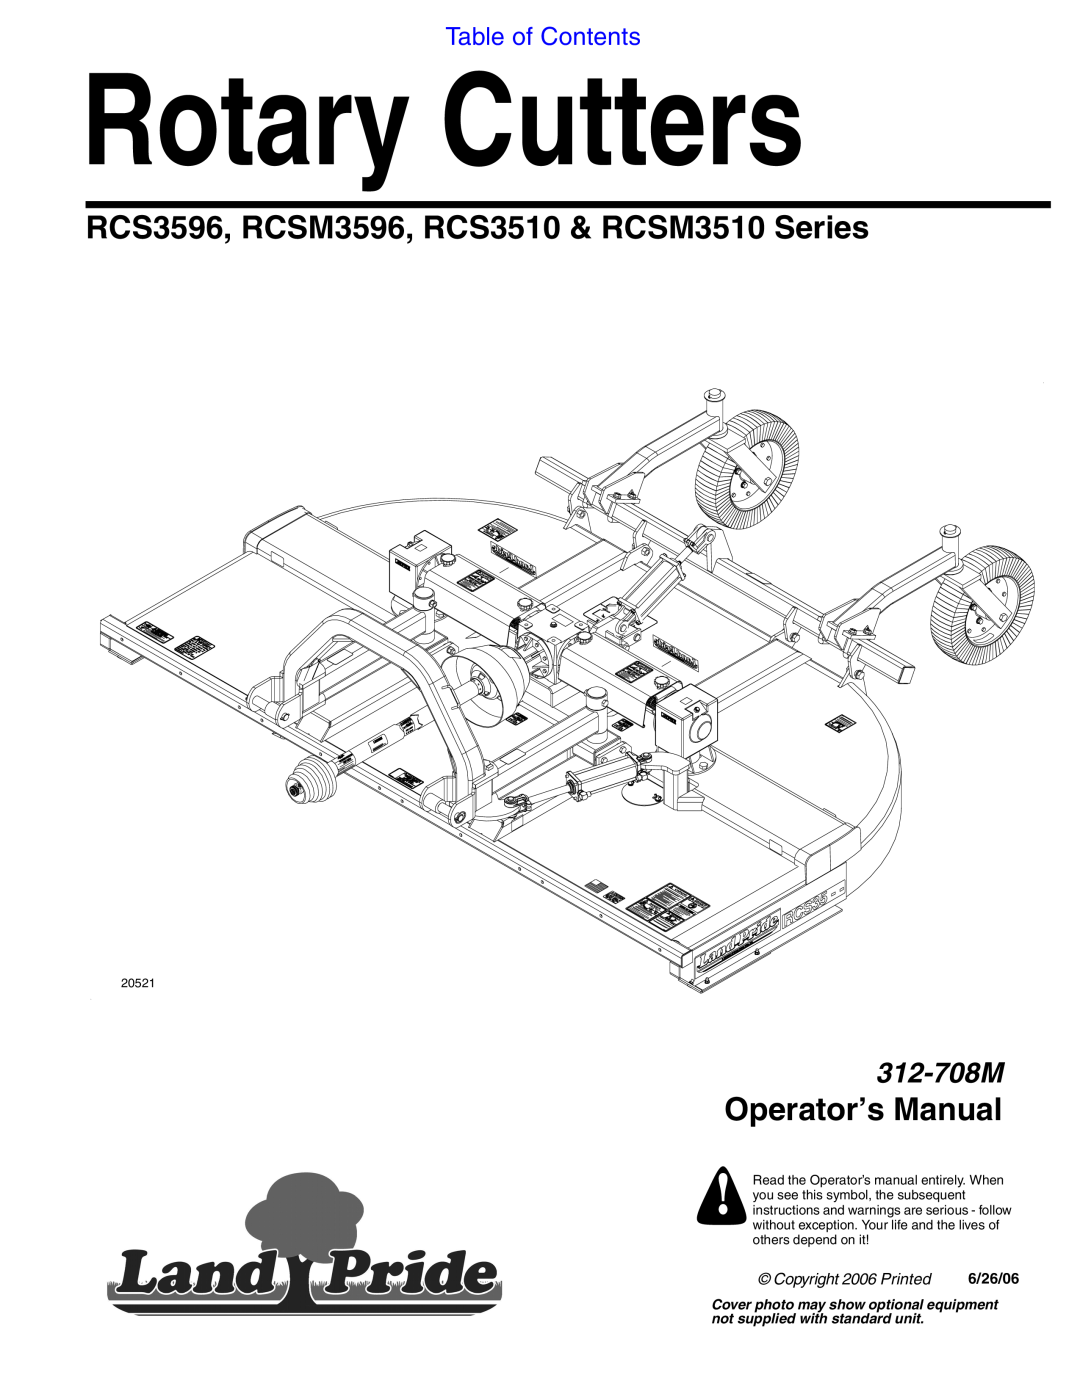 Land Pride manual Table of Contents, Rotary Cutters, RCS3596, RCSM3596, RCS3510 & RCSM3510 Series, Operator’s Manual 